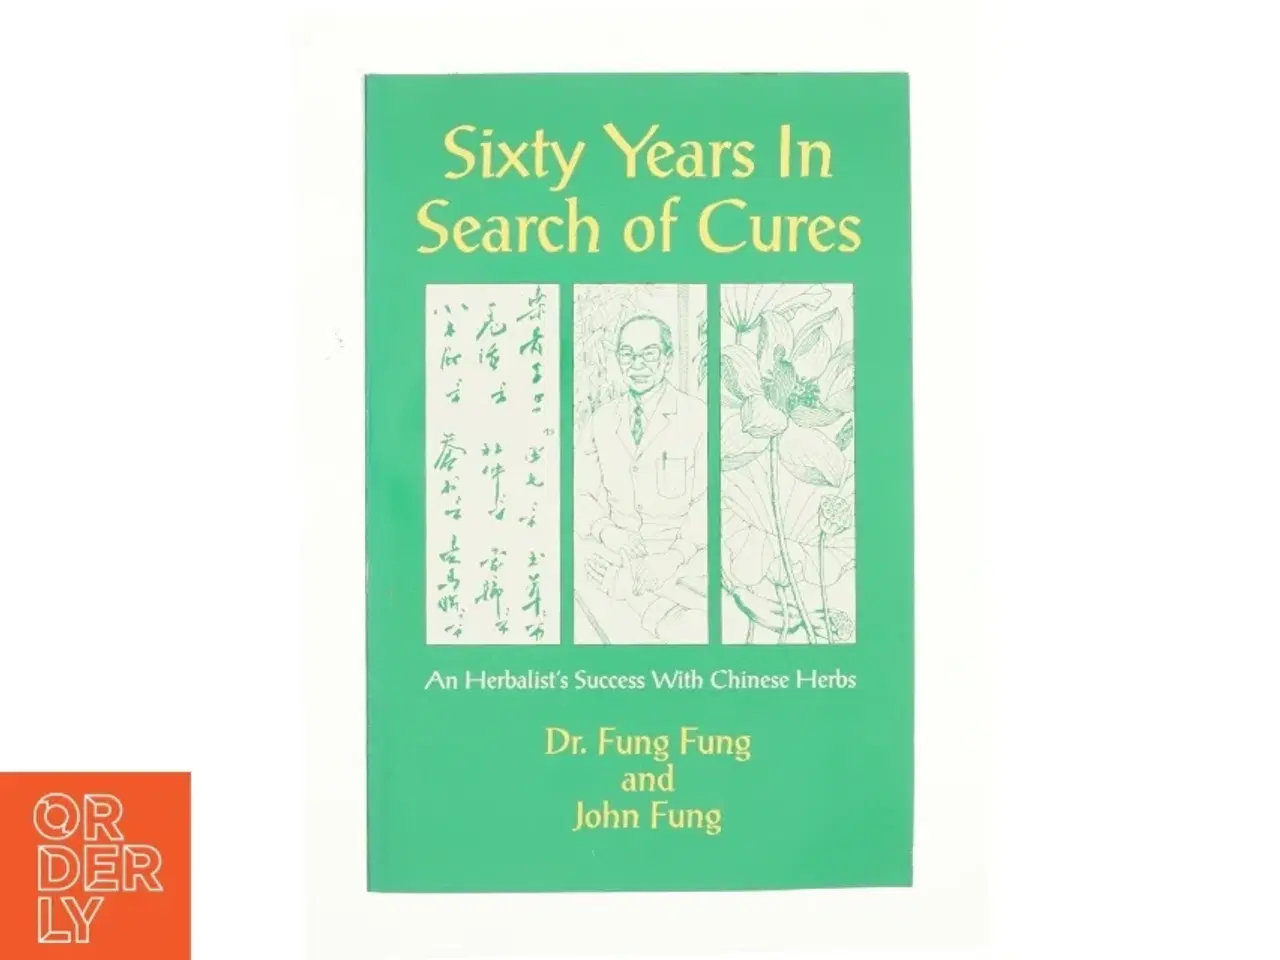 Billede 1 - Sixty Years in Search of Cures : an Herbalist's Success with Chinese Herbs af Dr. Fung Fung & John Fung (Bog)